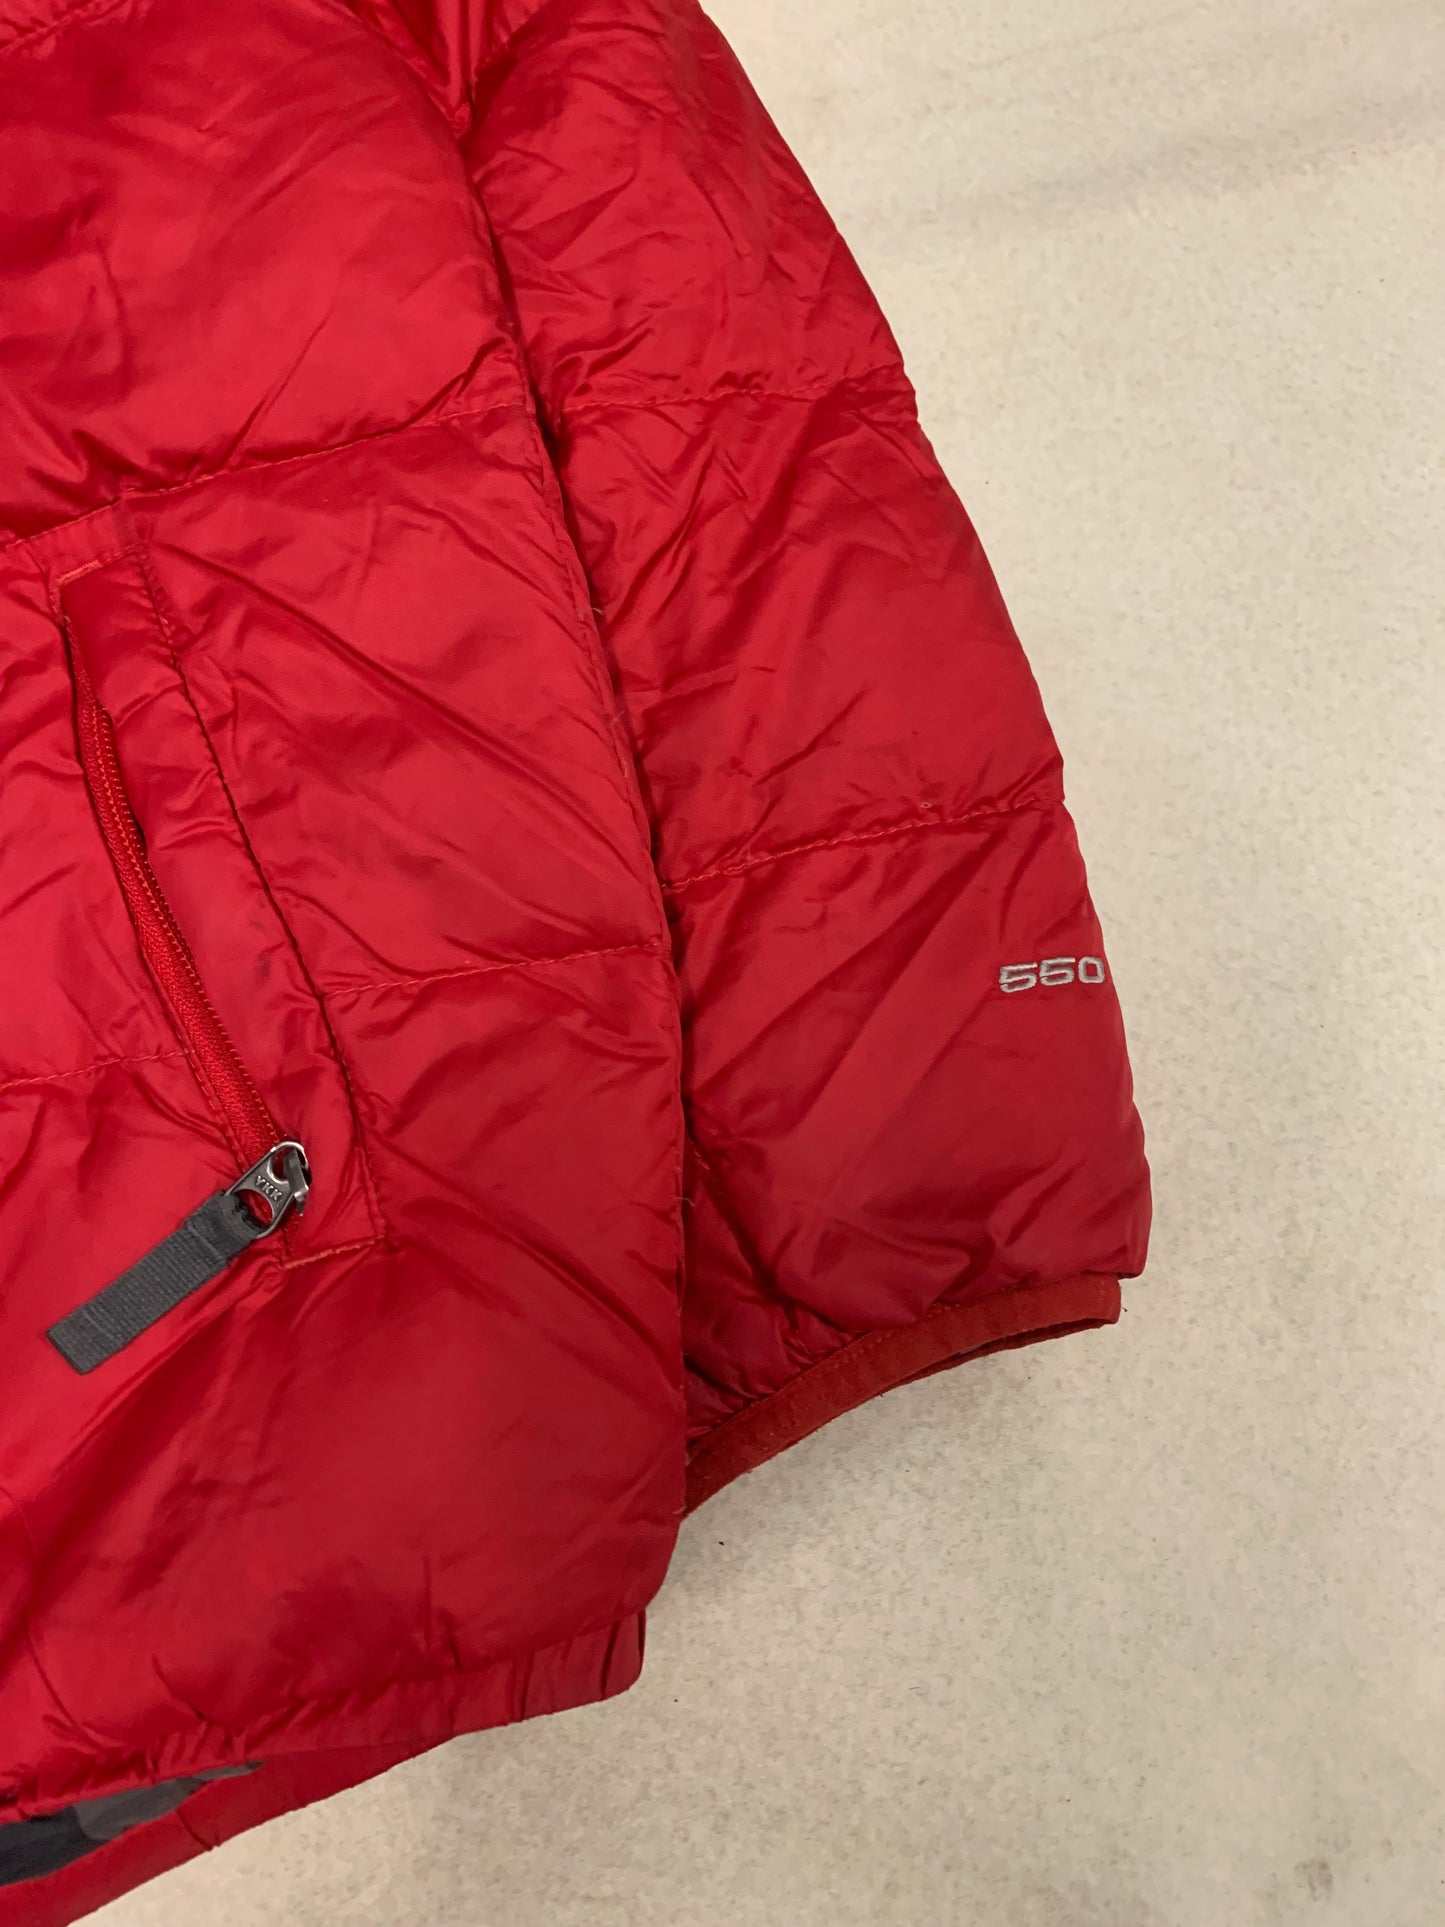 Chaqueta Puffer Vintage The North Face 550 Reversible - S